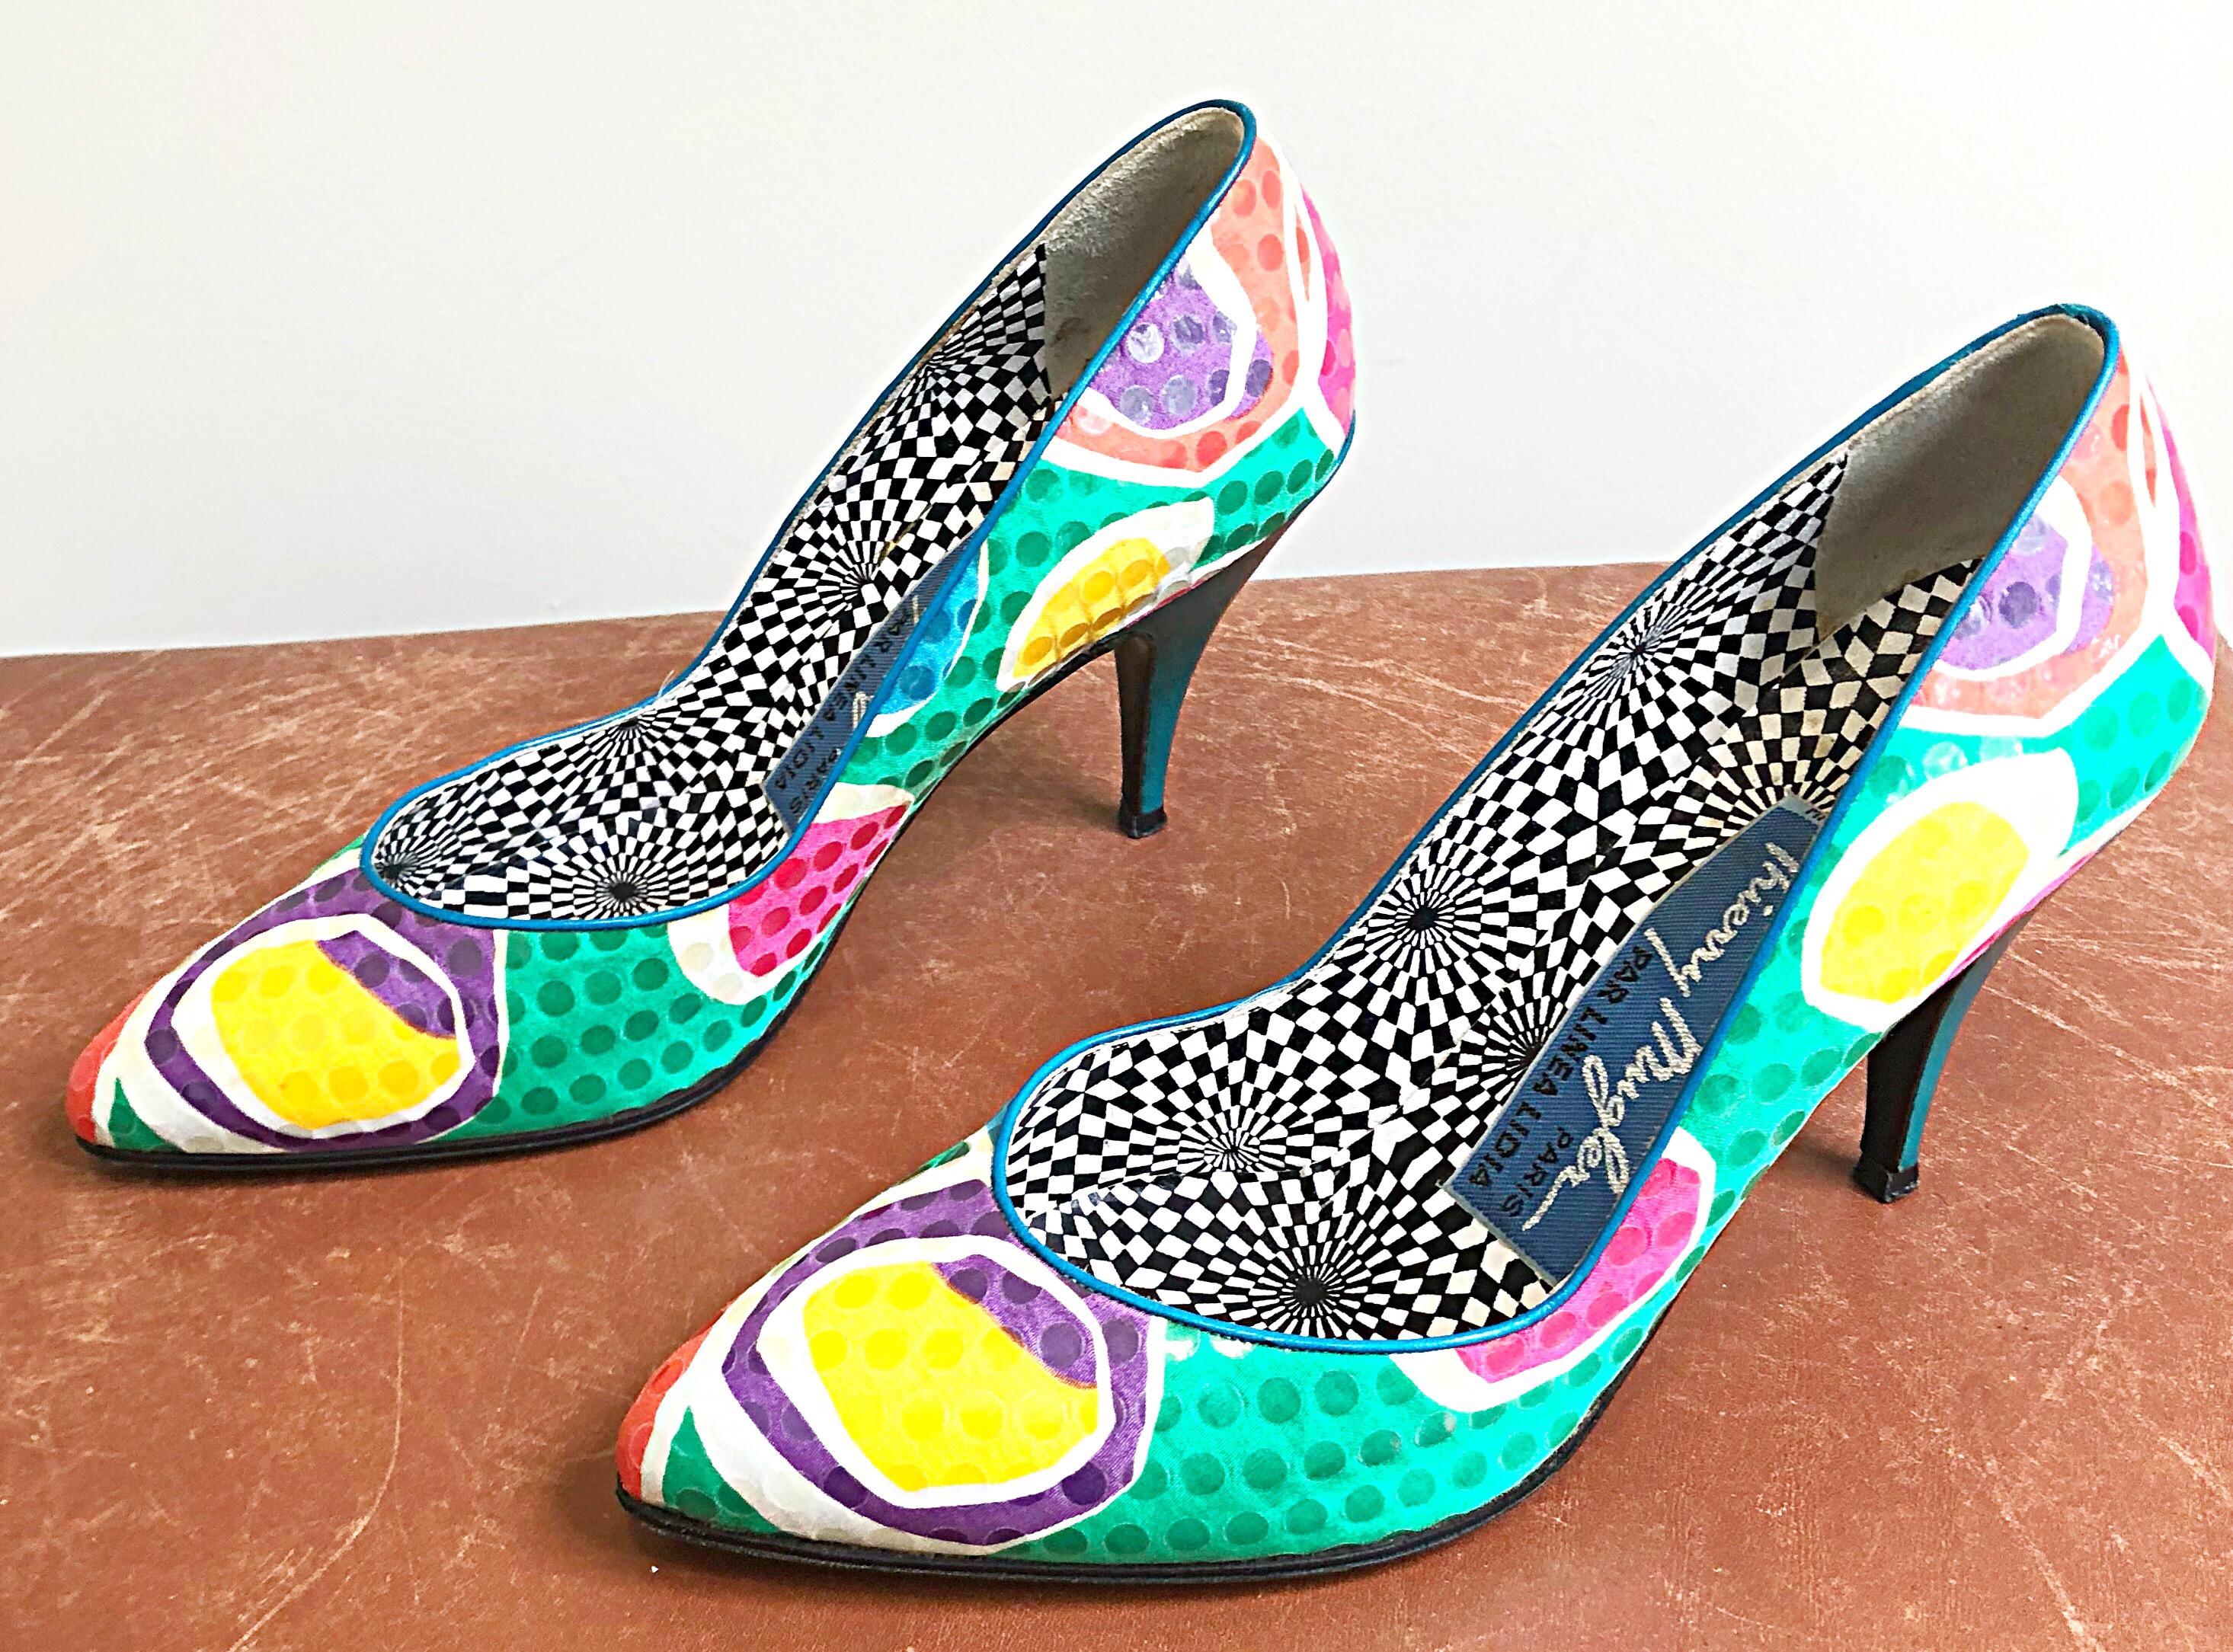 Rare beautiful vintage early 1990s / 90s THIERRY MUGLER colorful abstract sequined high heels! Features abstract geometric prints in Kelly green, turquoise blue, fuchsia pink, yellow, purple and white. Clear sequins throughout. Turquoise blue heel.